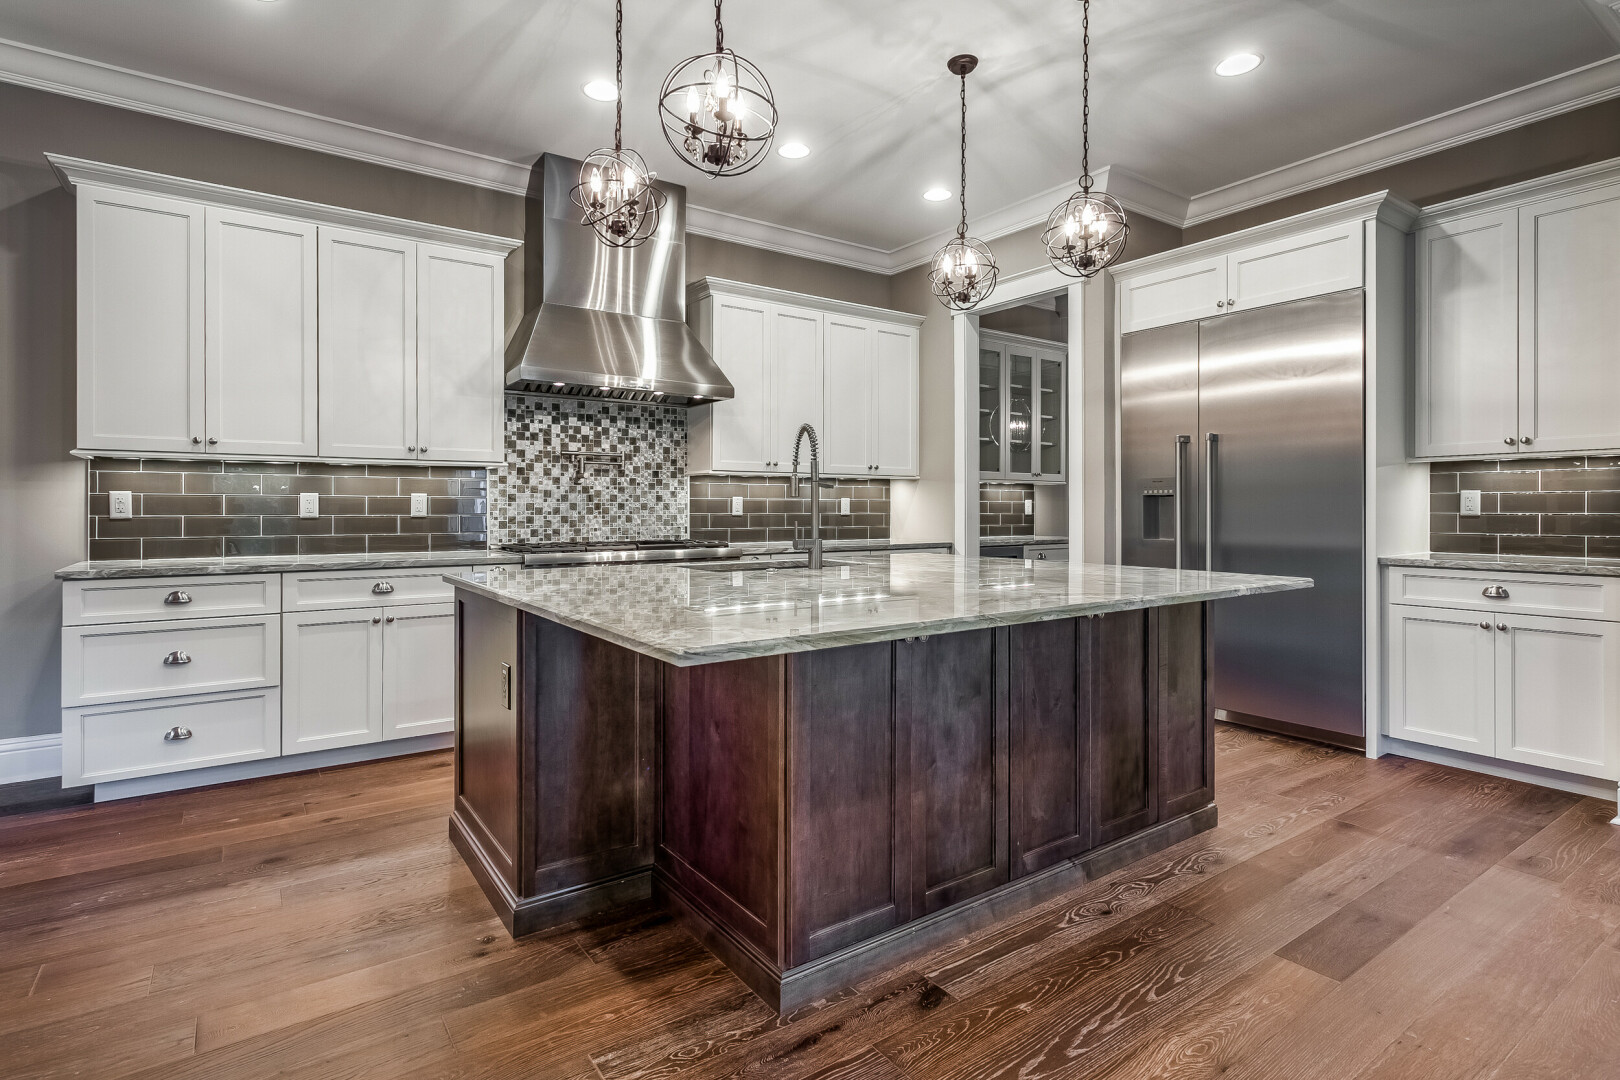 Luxury kitchen boasting a custom island and tile throughout, St. Petersburg FL